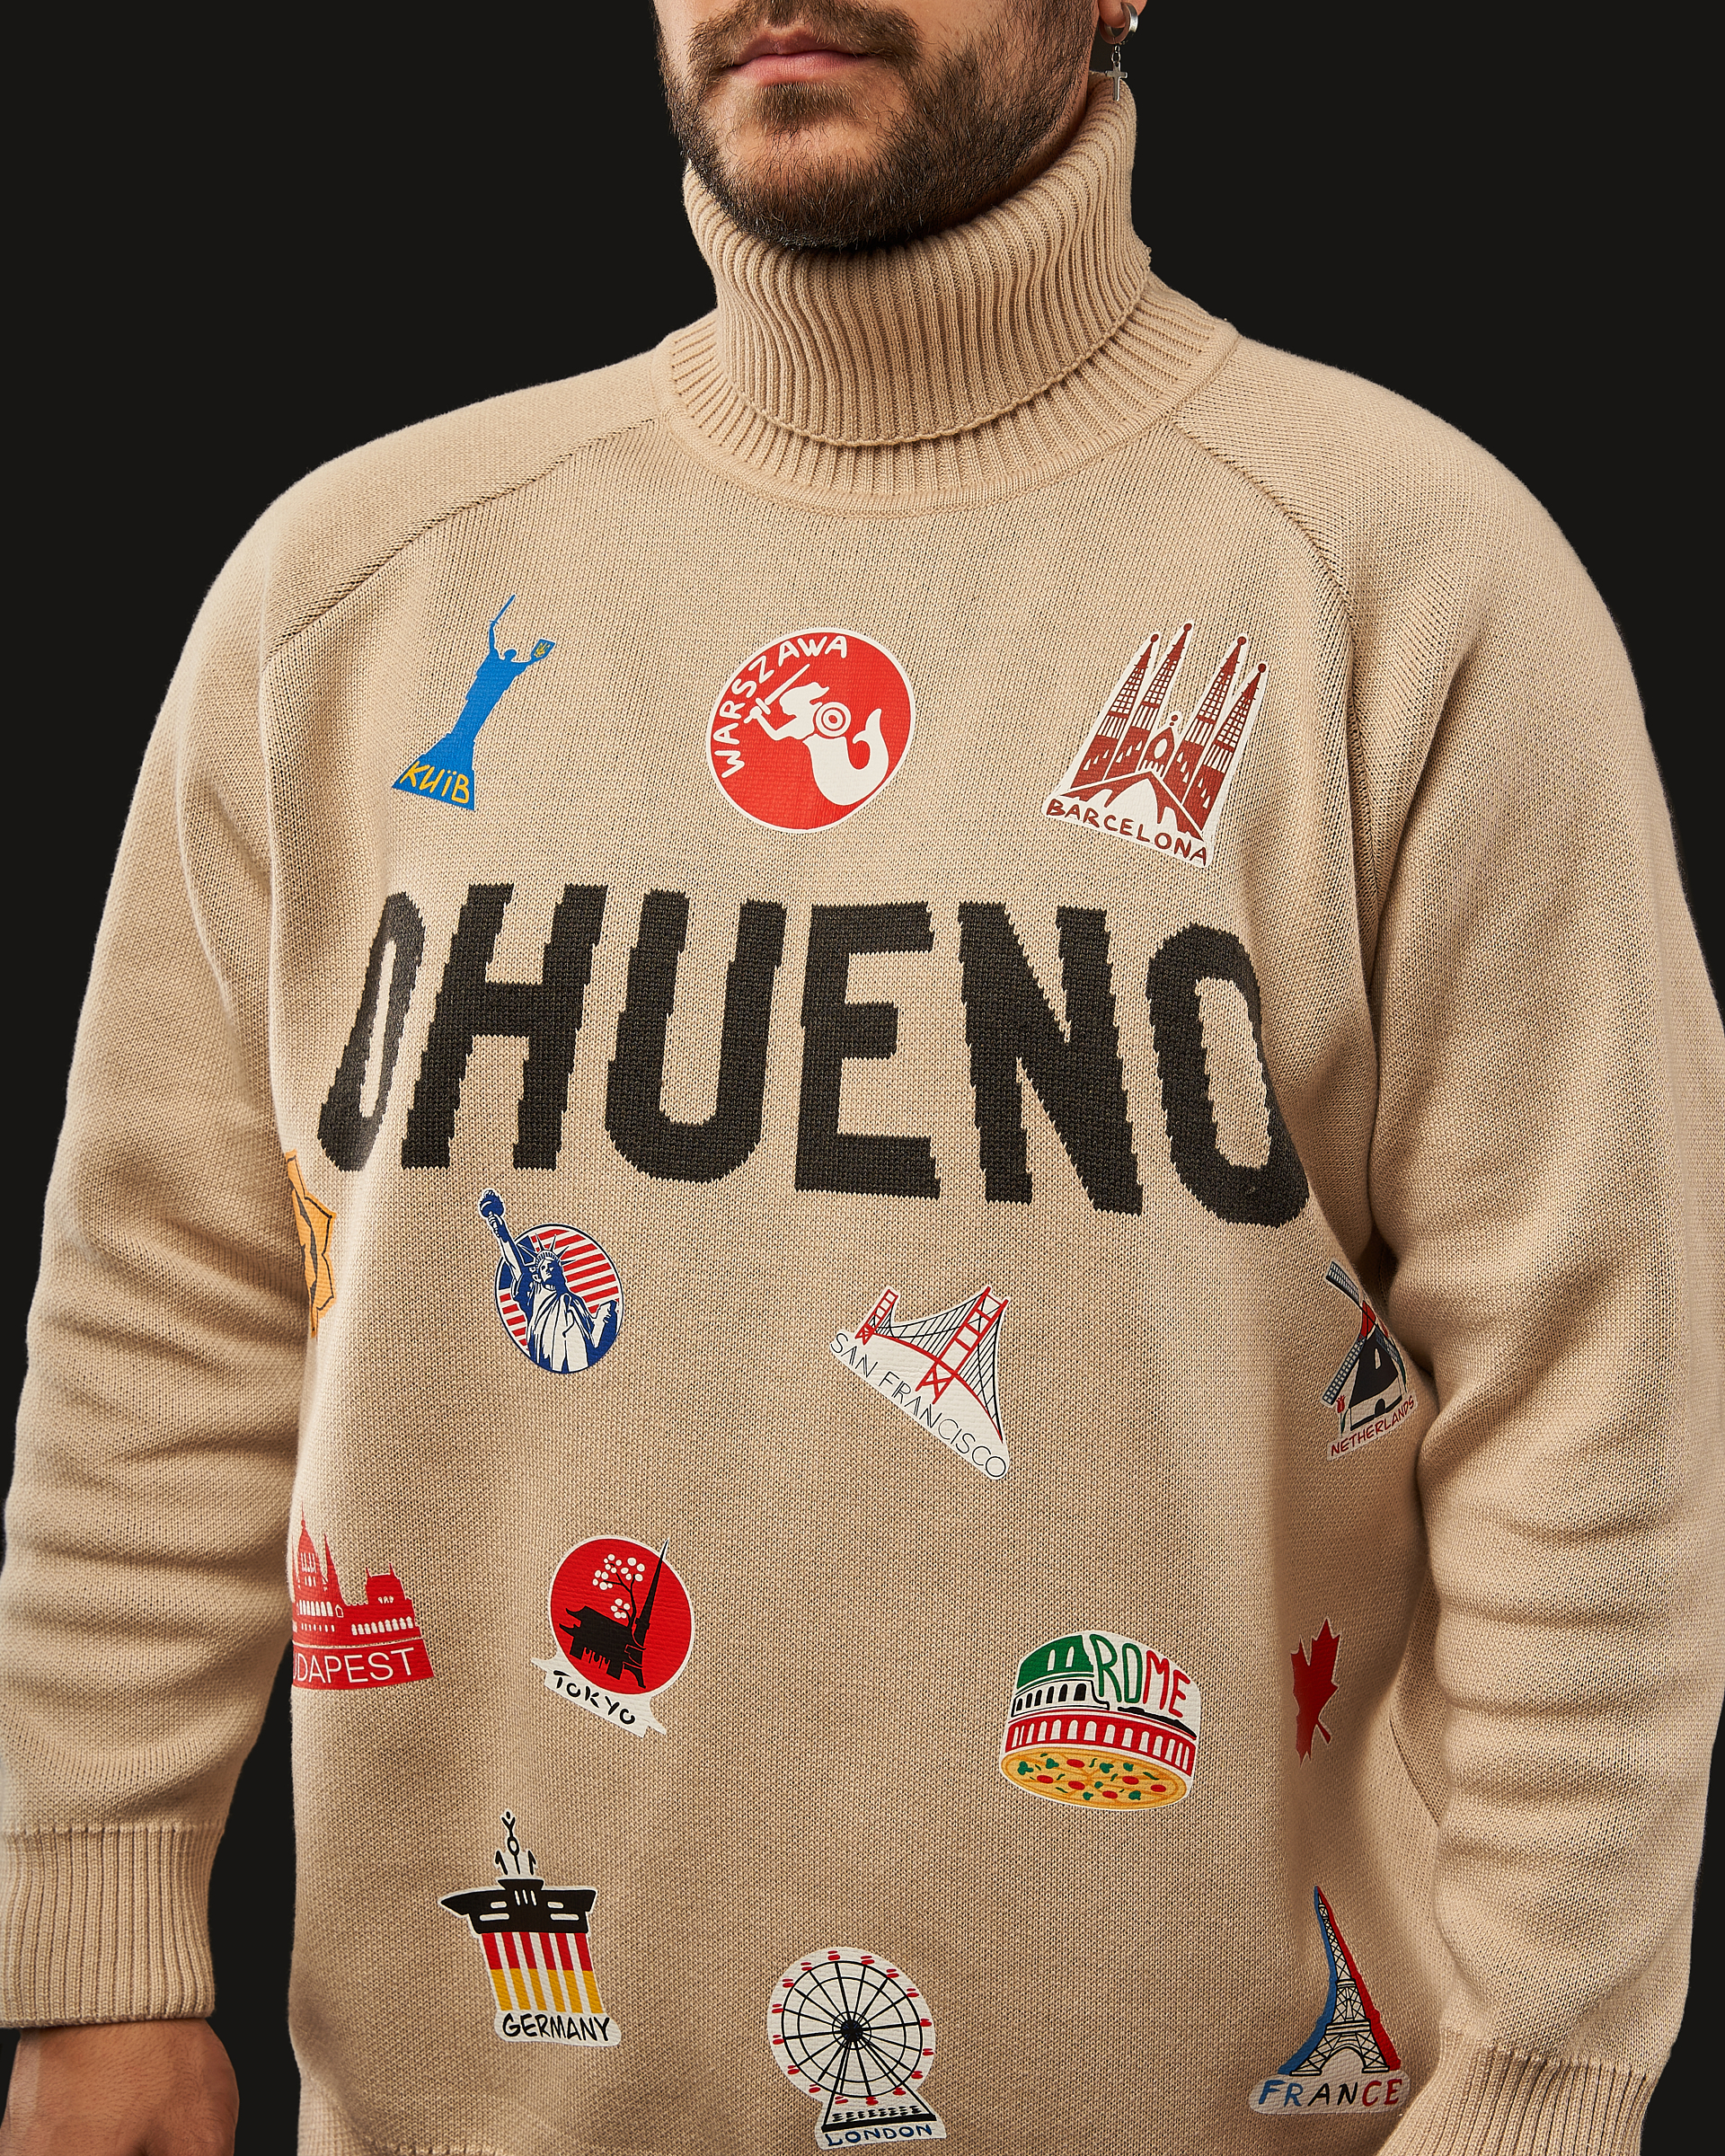 Sweter (beżowy) Image: https://ohueno-official.com/wp-content/uploads/m01953.jpg